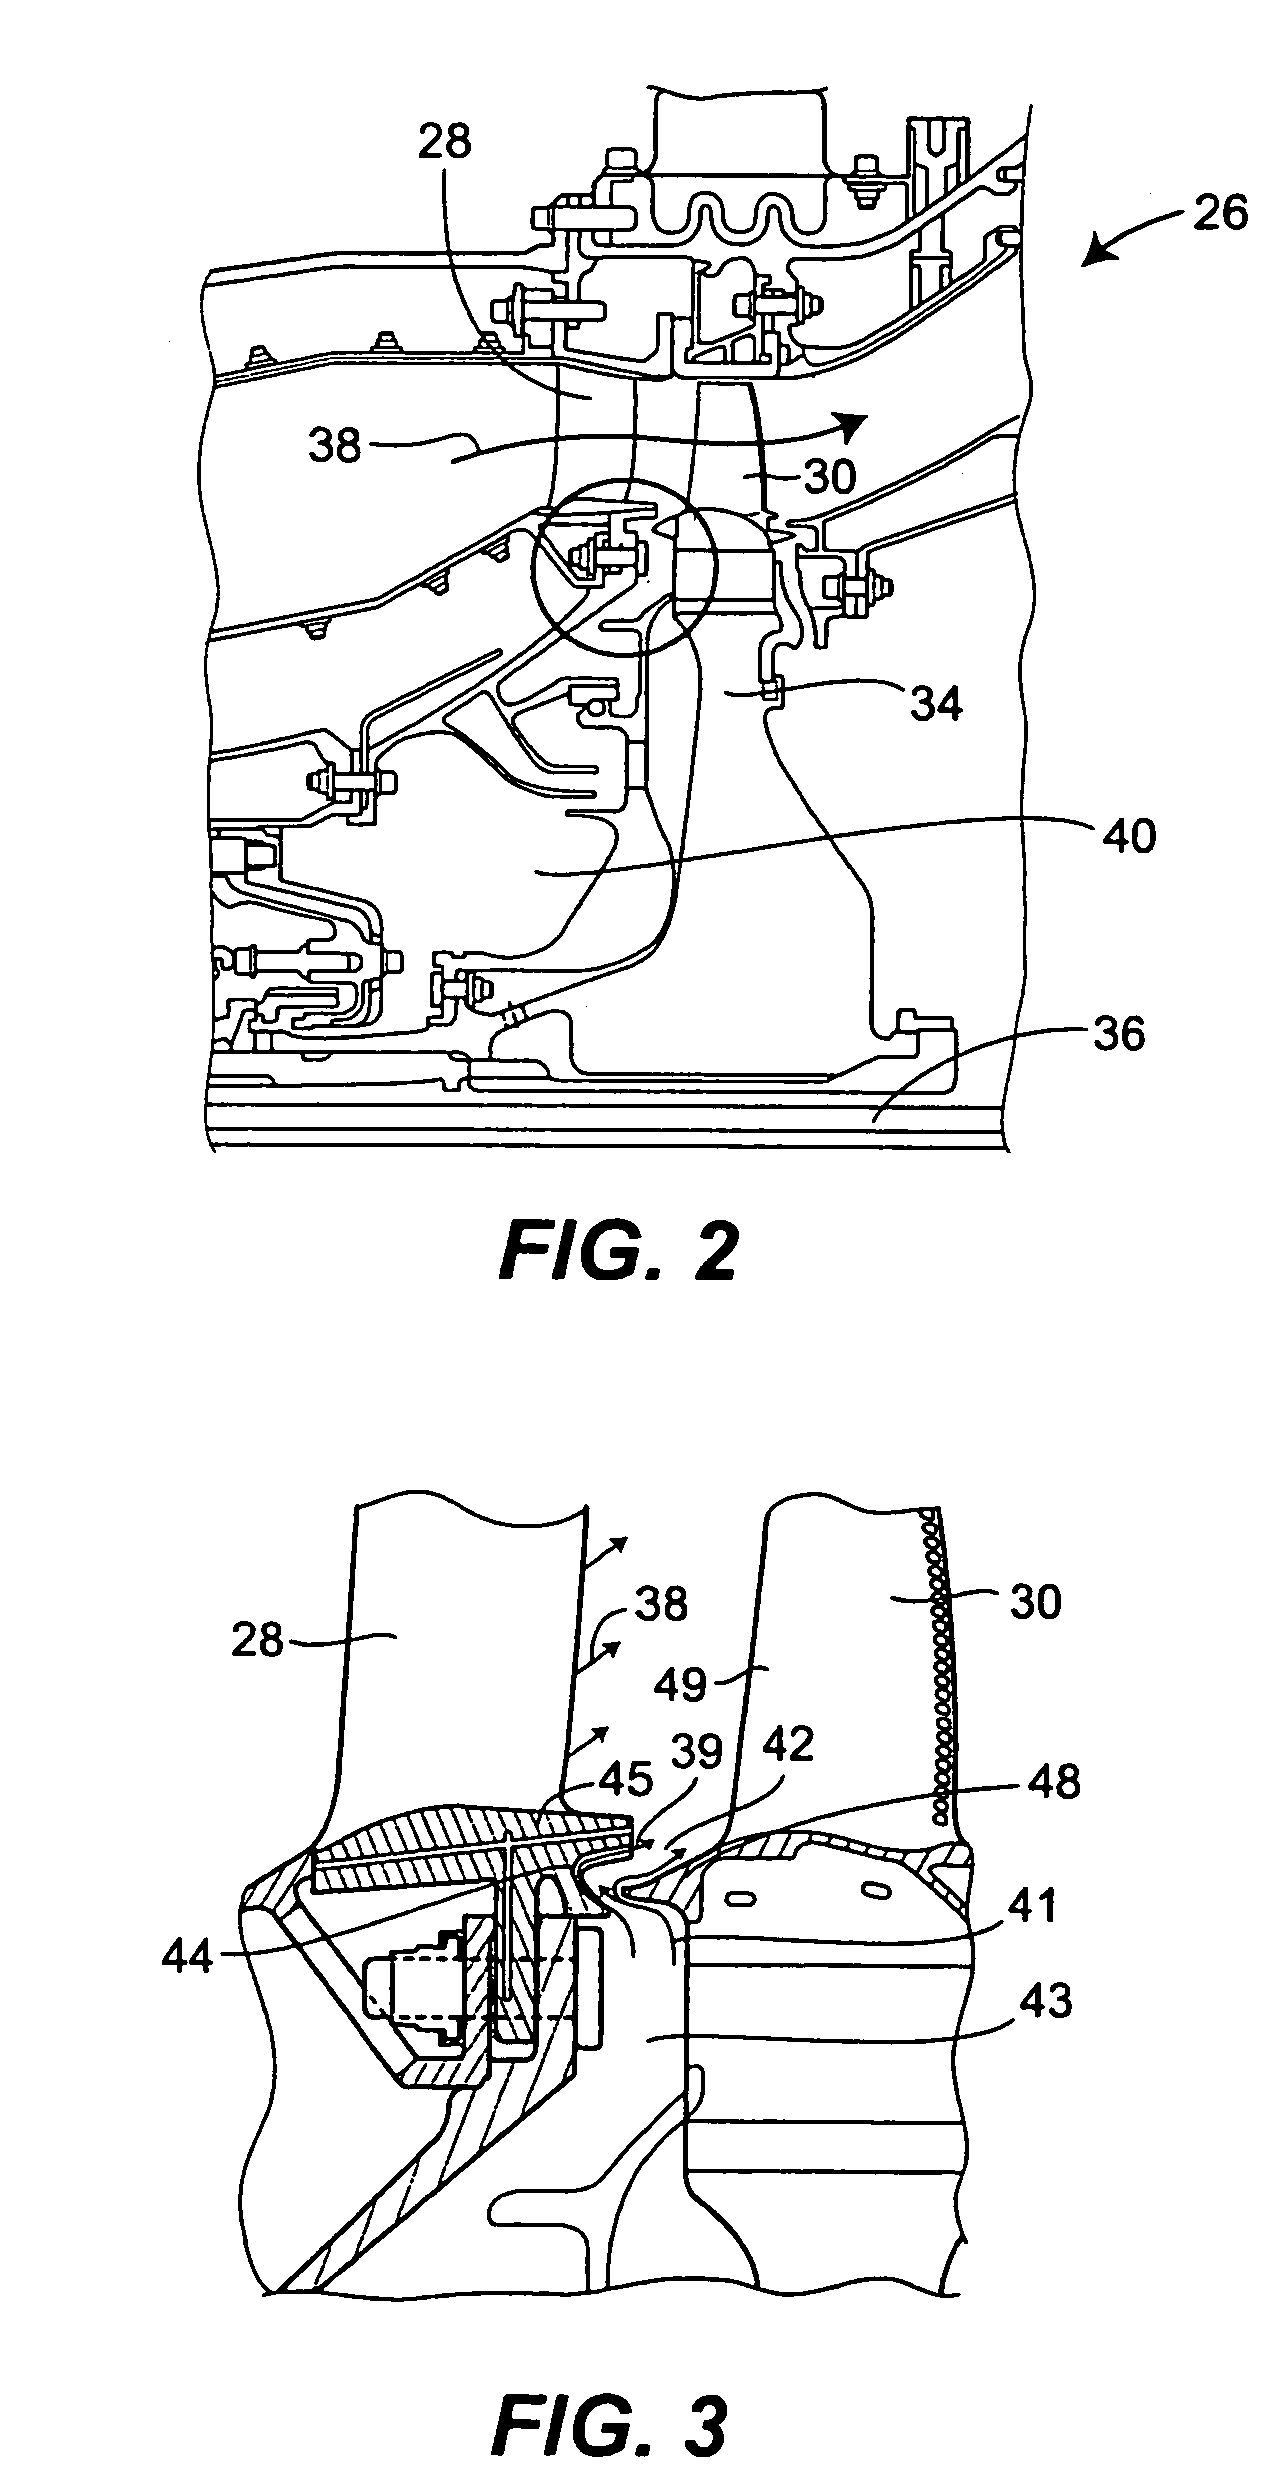 Cavity on-board injection for leakage flows